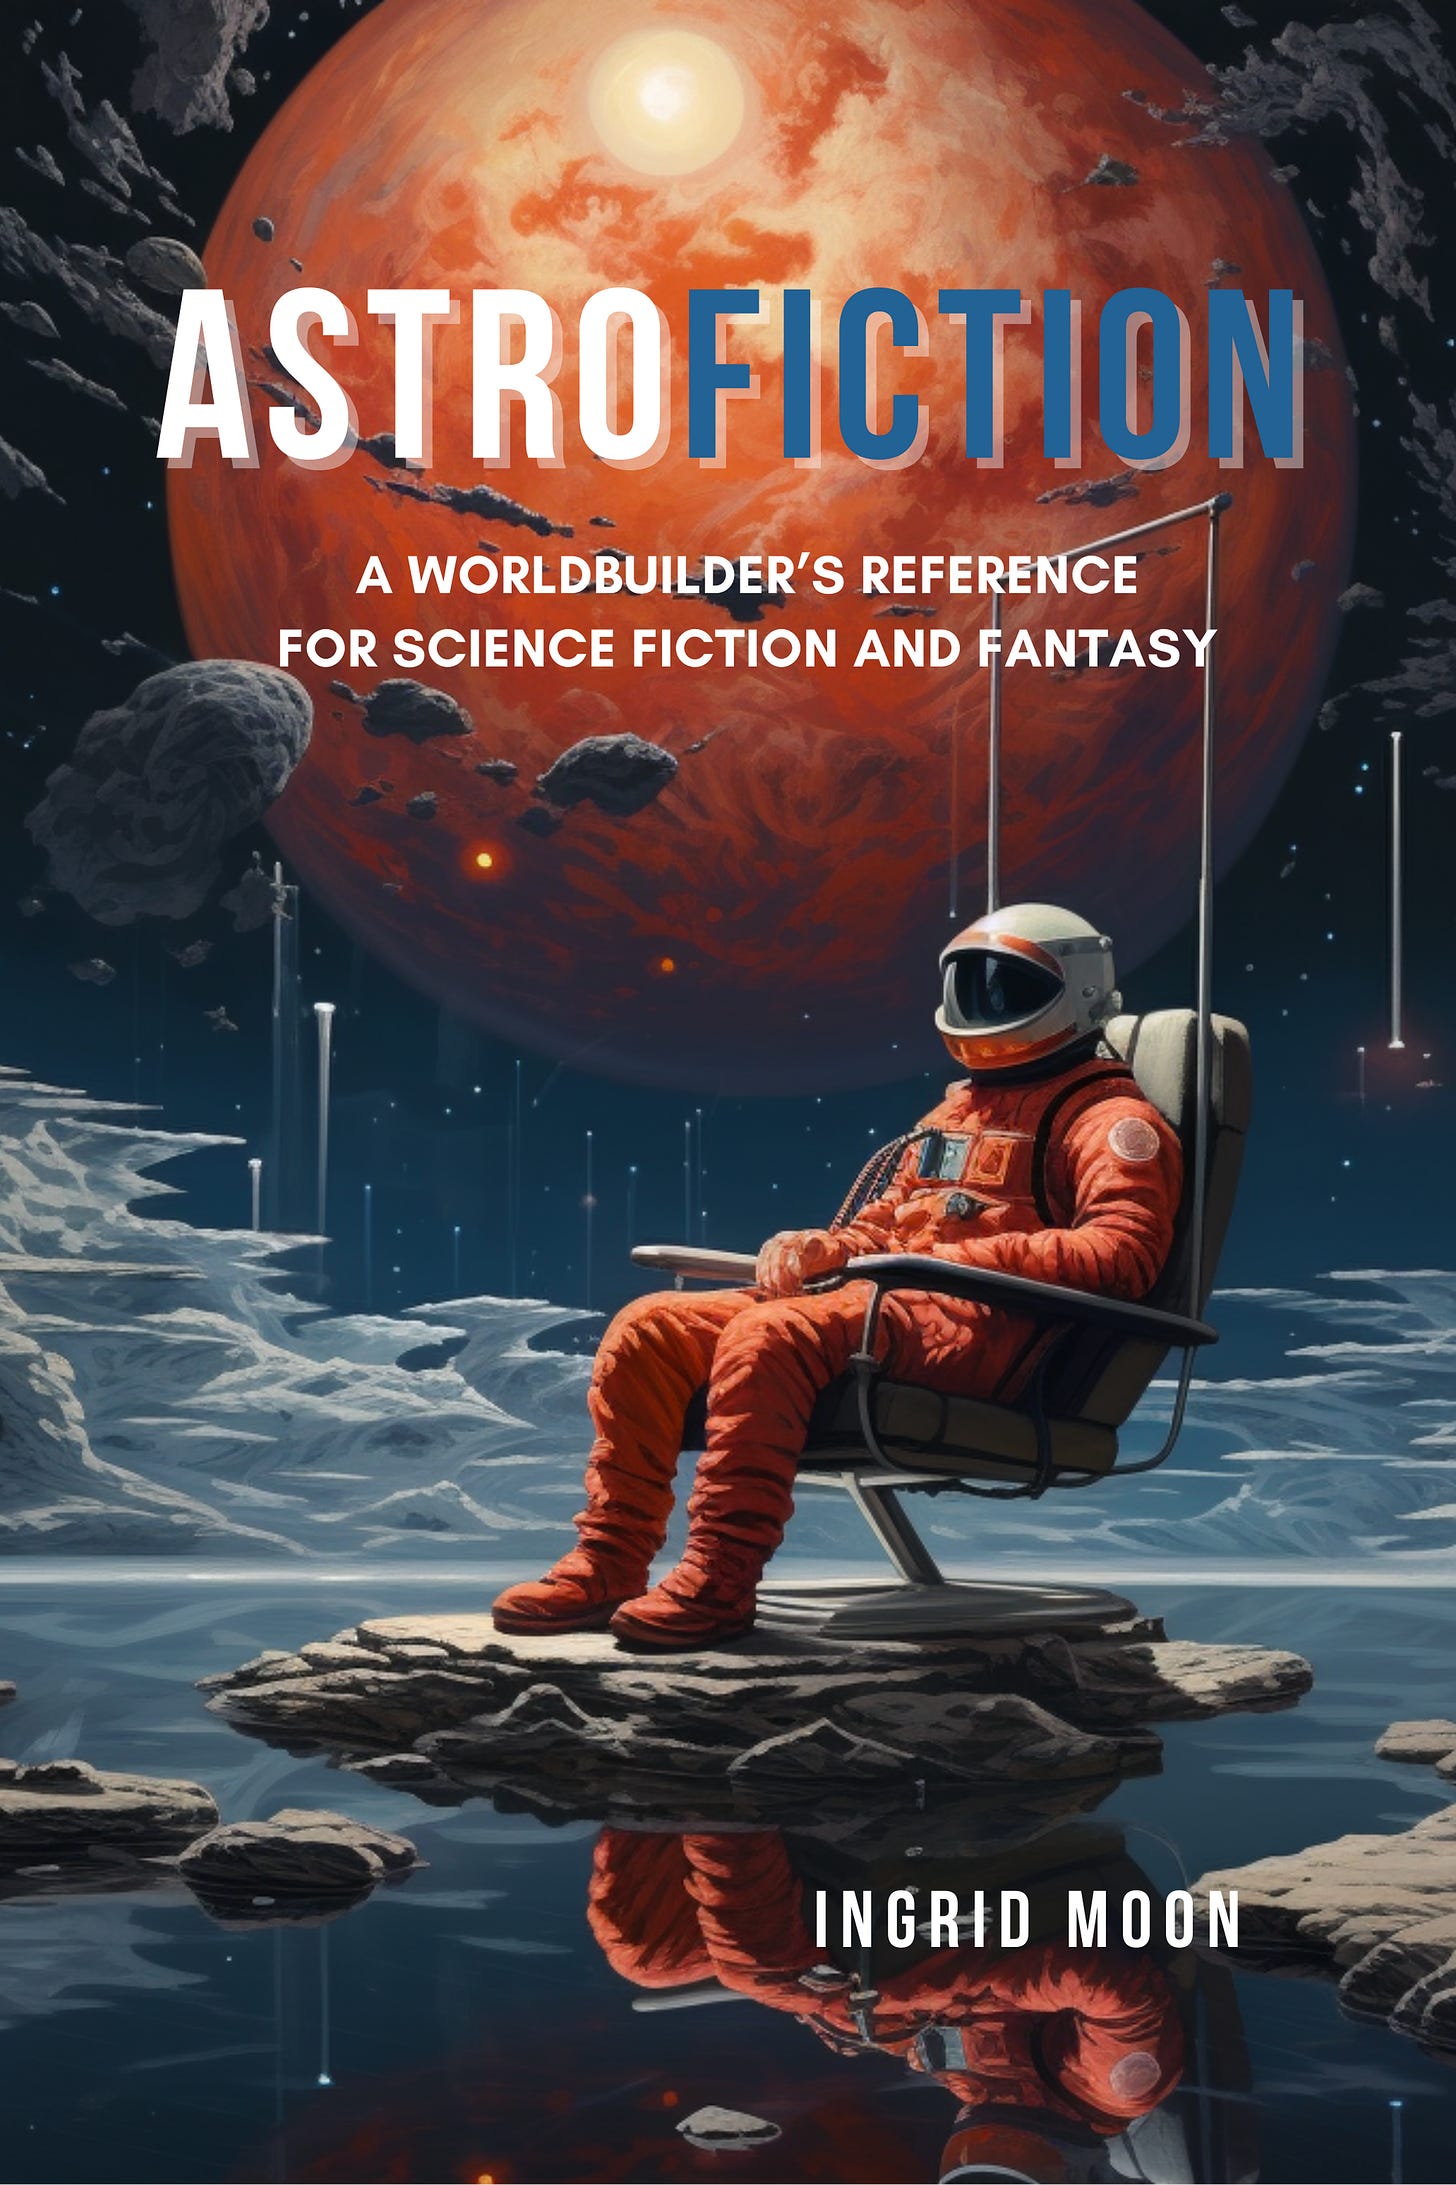 Book cover: Astrofiction, available at http://bit.ly/astrofiction